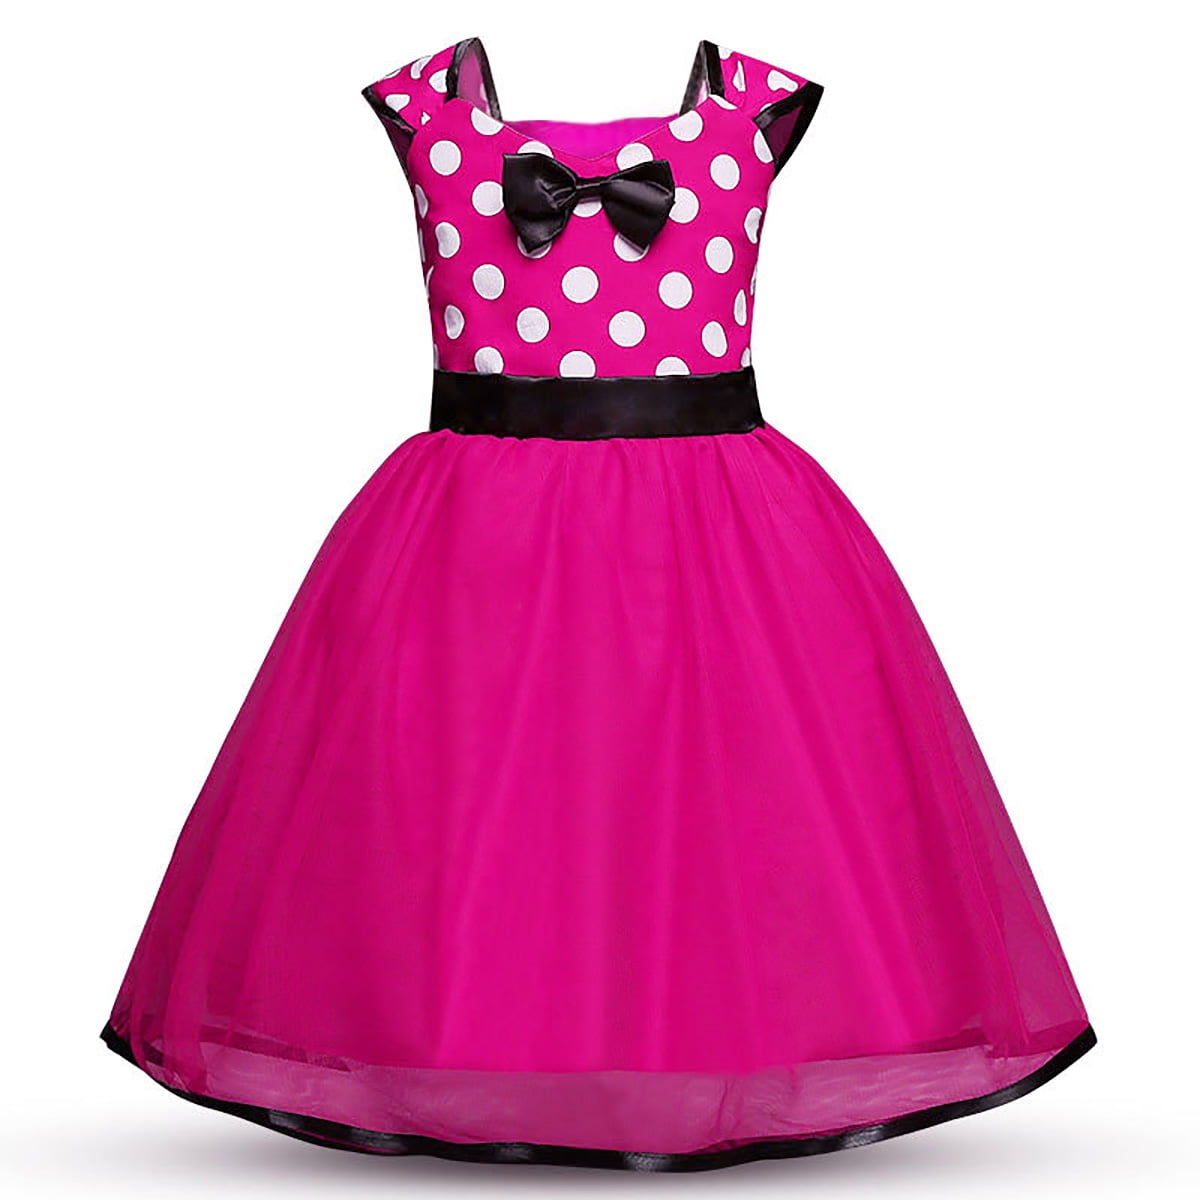 Kids Girls Baby Toddler Minnie Mouse Costume Birthday Party Tutu Dress Outfits 